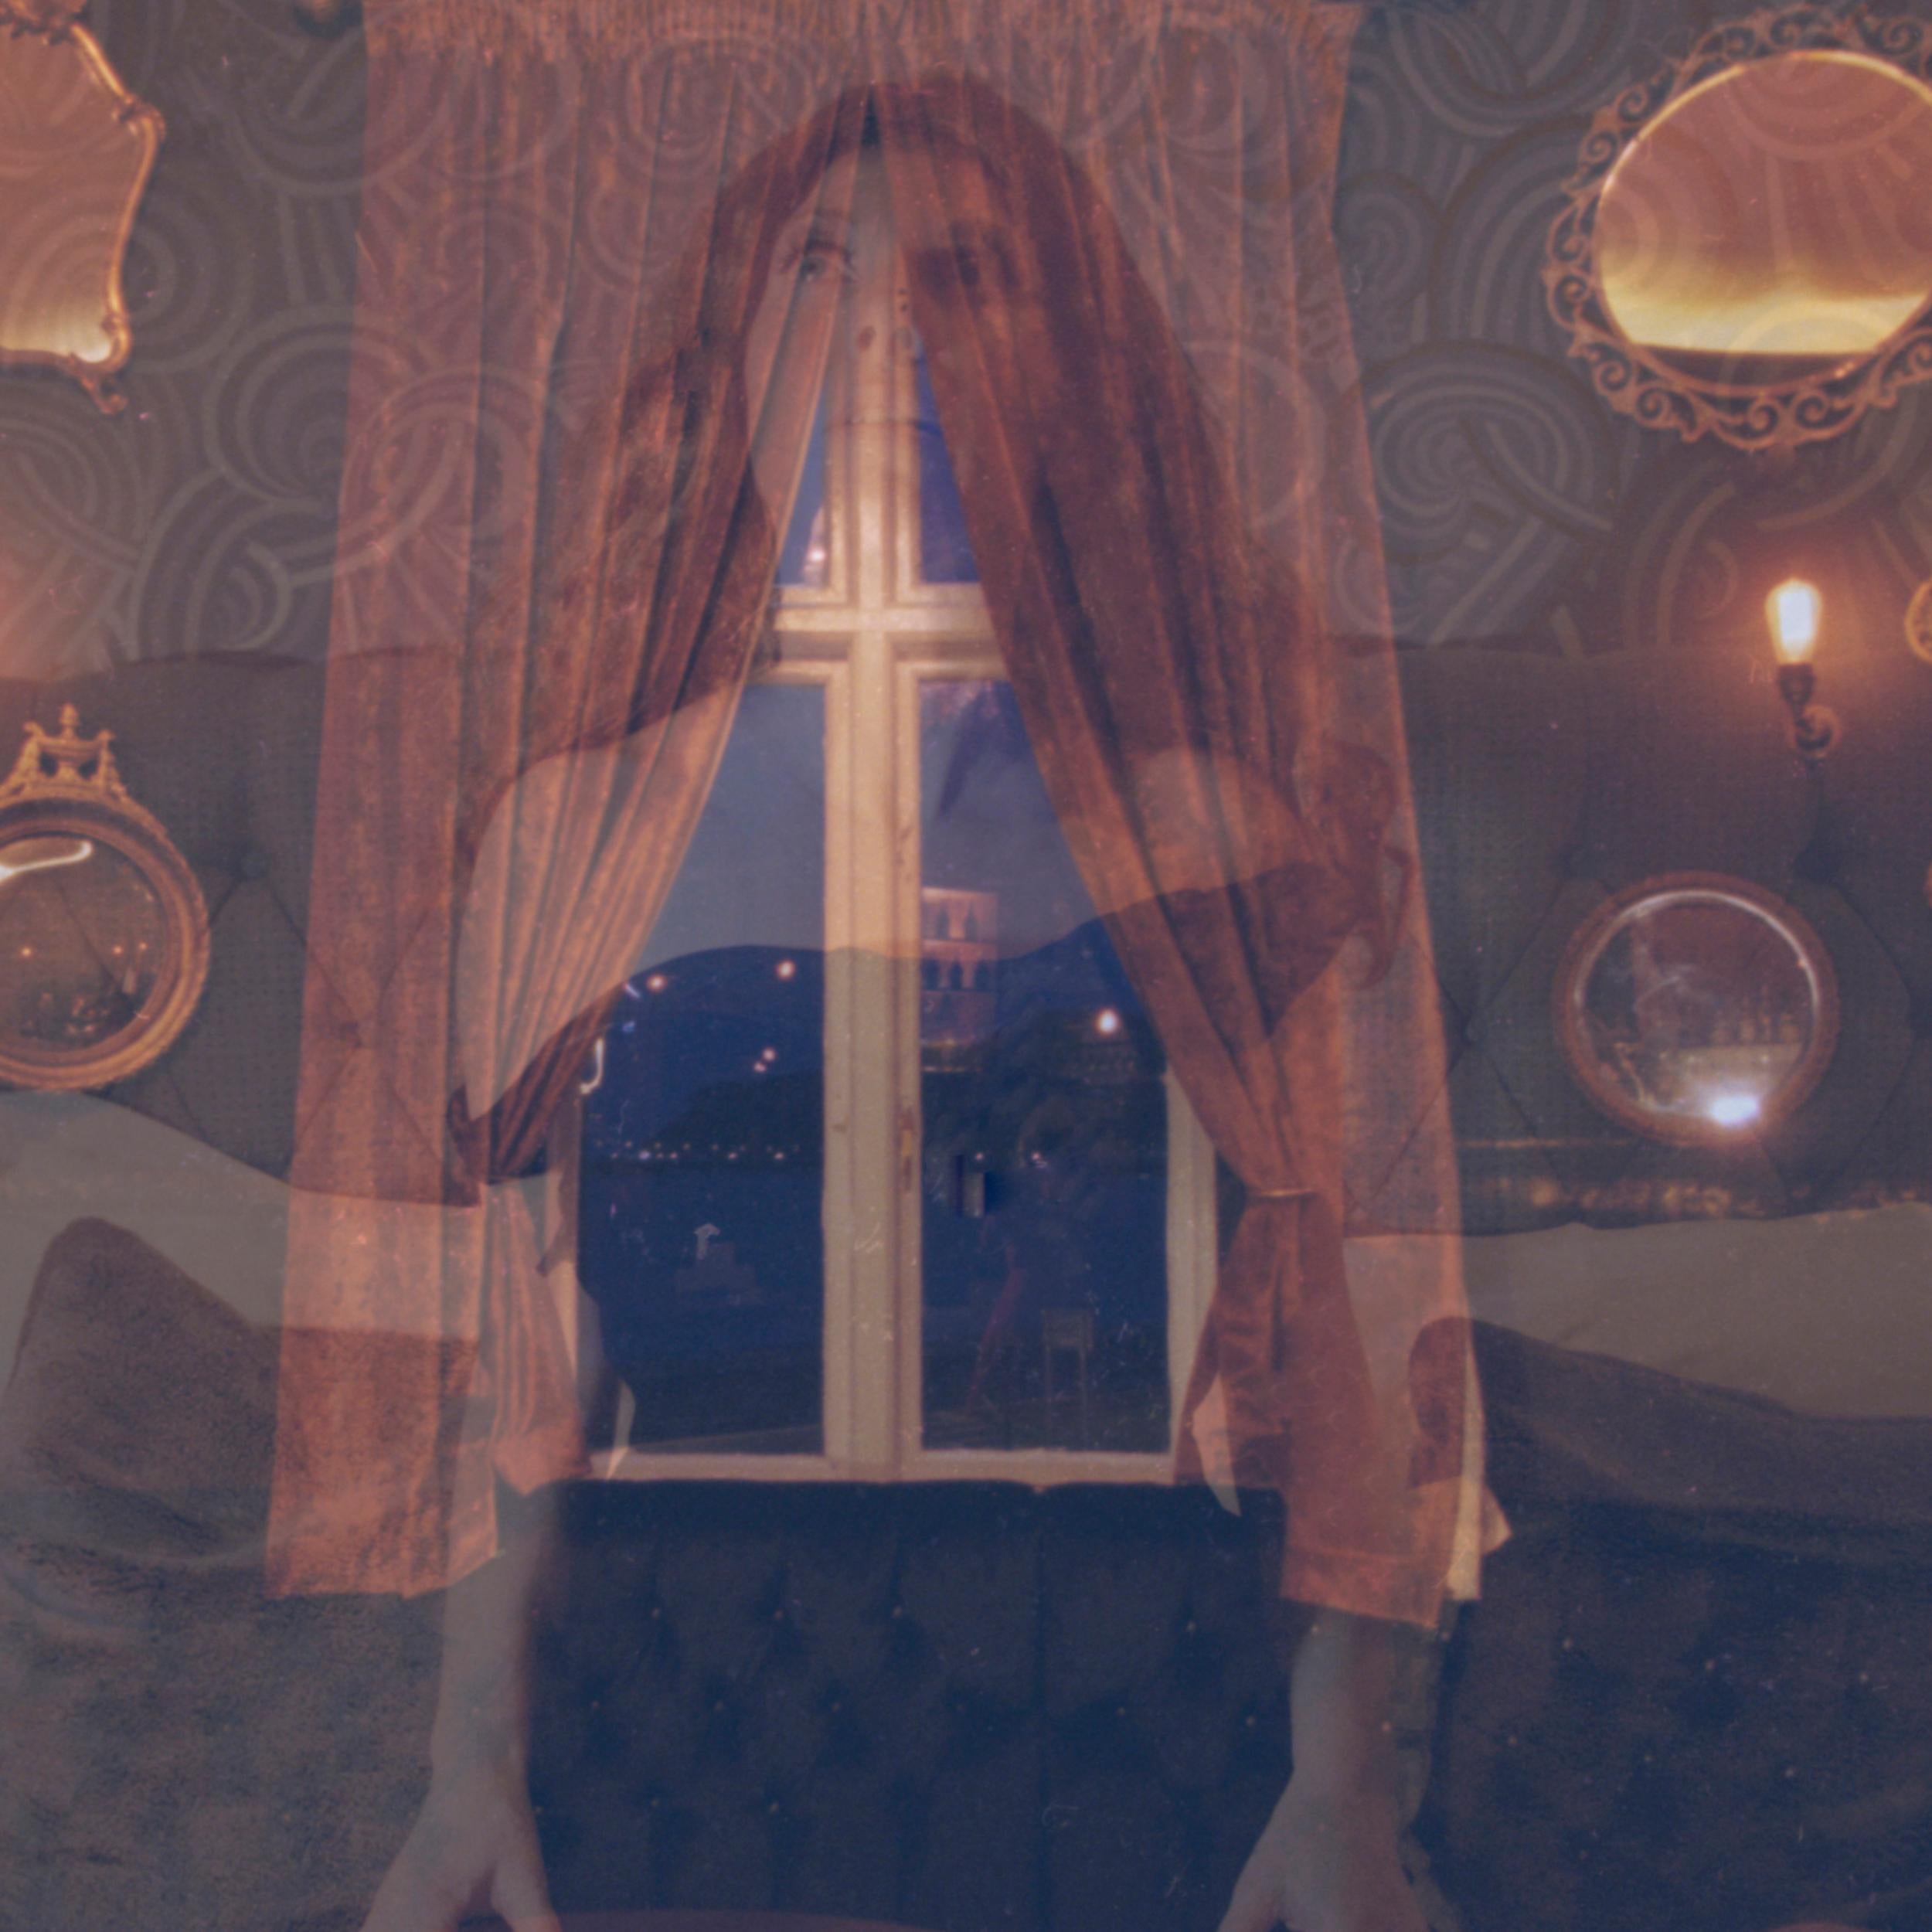 Clare Marie Bailey Color Photograph - Visions at the Mirrored Palace - Contemporary, Polaroid, Woman, Psychiatry